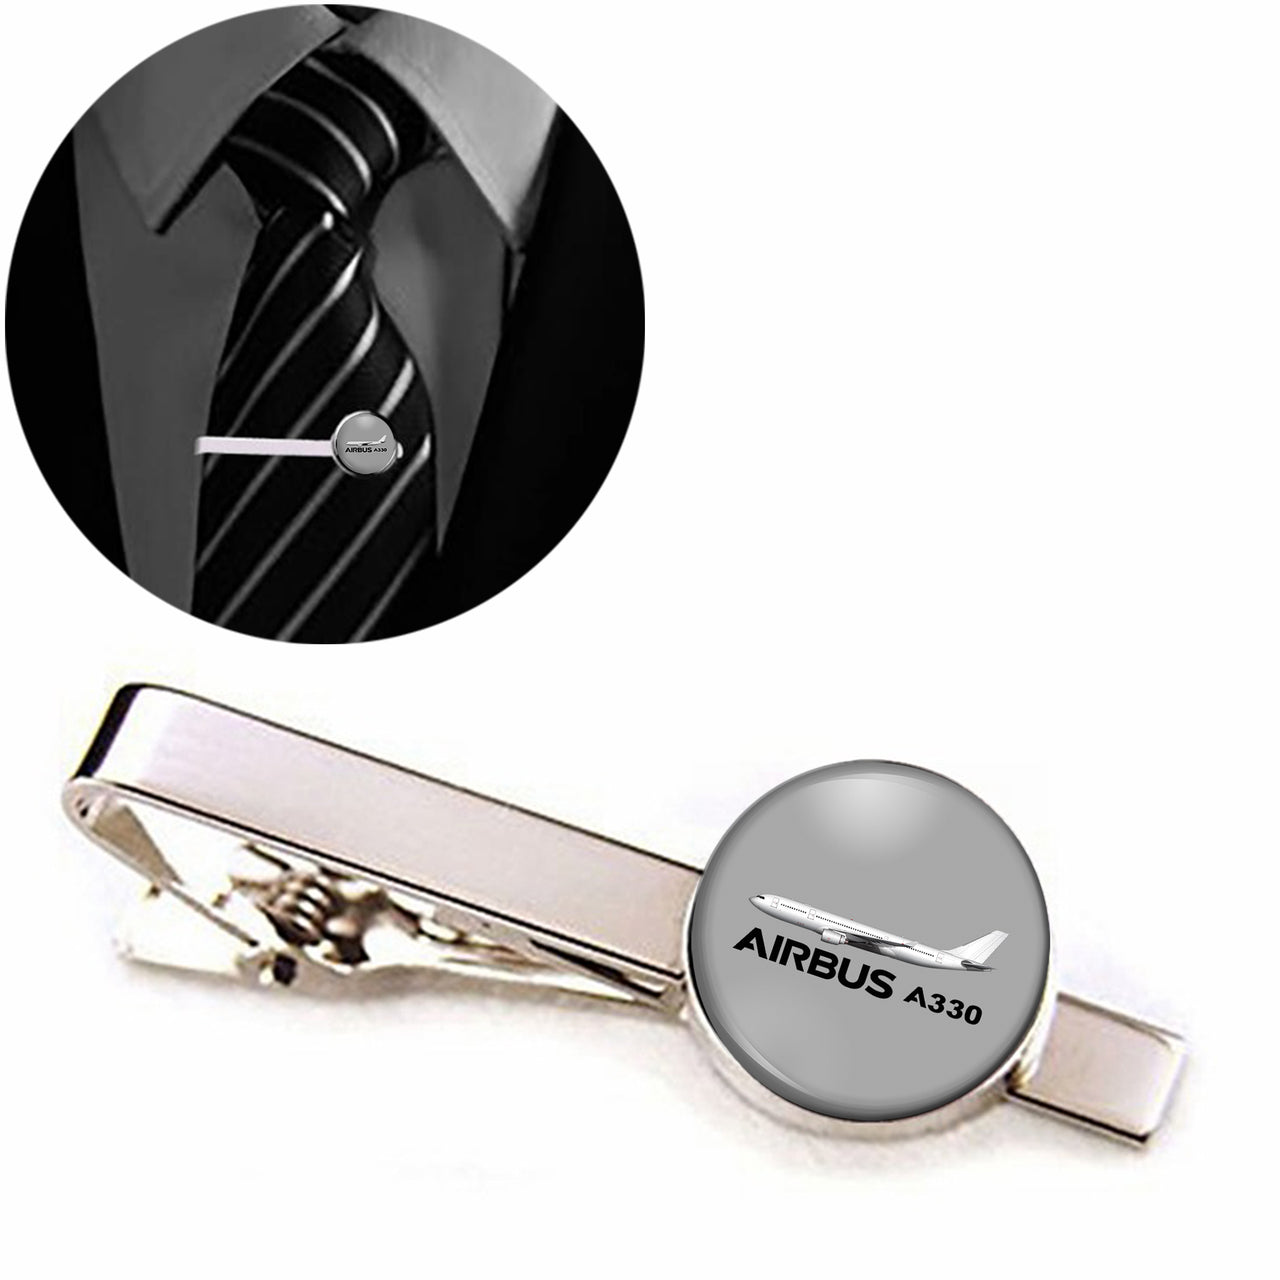 The Airbus A330 Designed Tie Clips